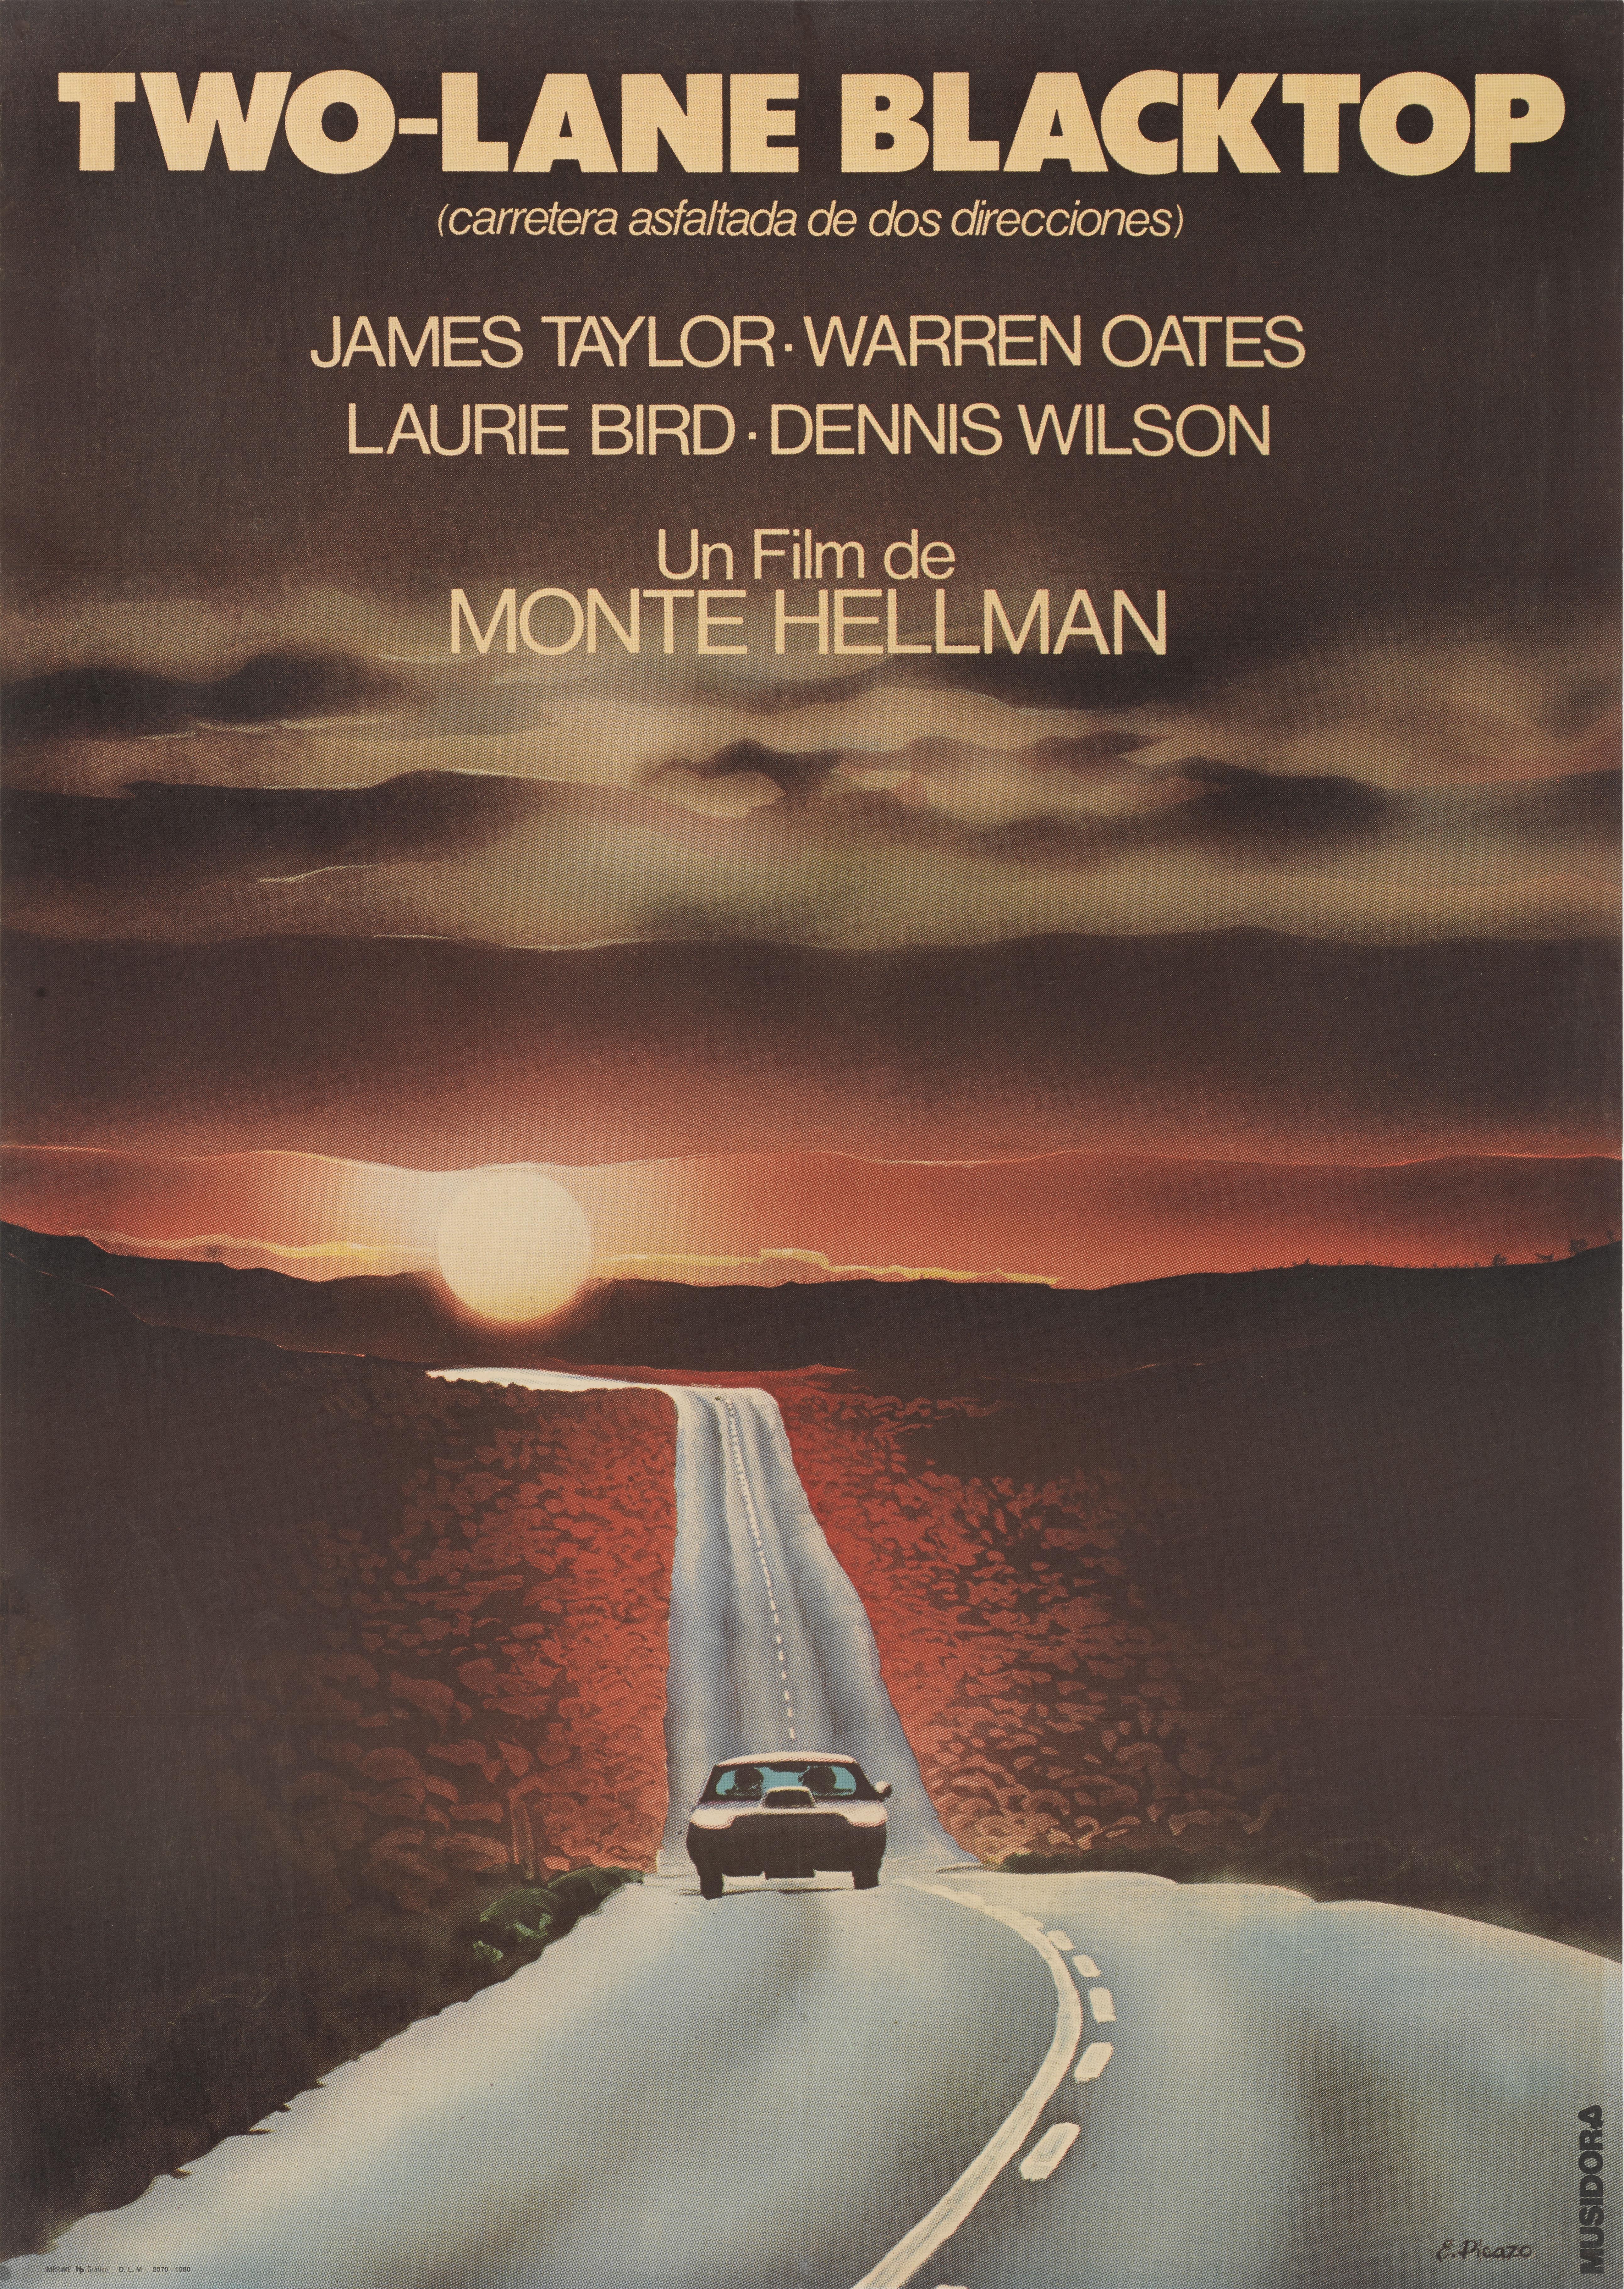 Original Spanish film poster for the 1971 Road movie Two-Lane Blacktop.
This film starred James Taylor and Warren Oates and directed by Monte Hellman.
The artwork on this poster is by E. Picazo and is unique to the films Spanish release.
This poster